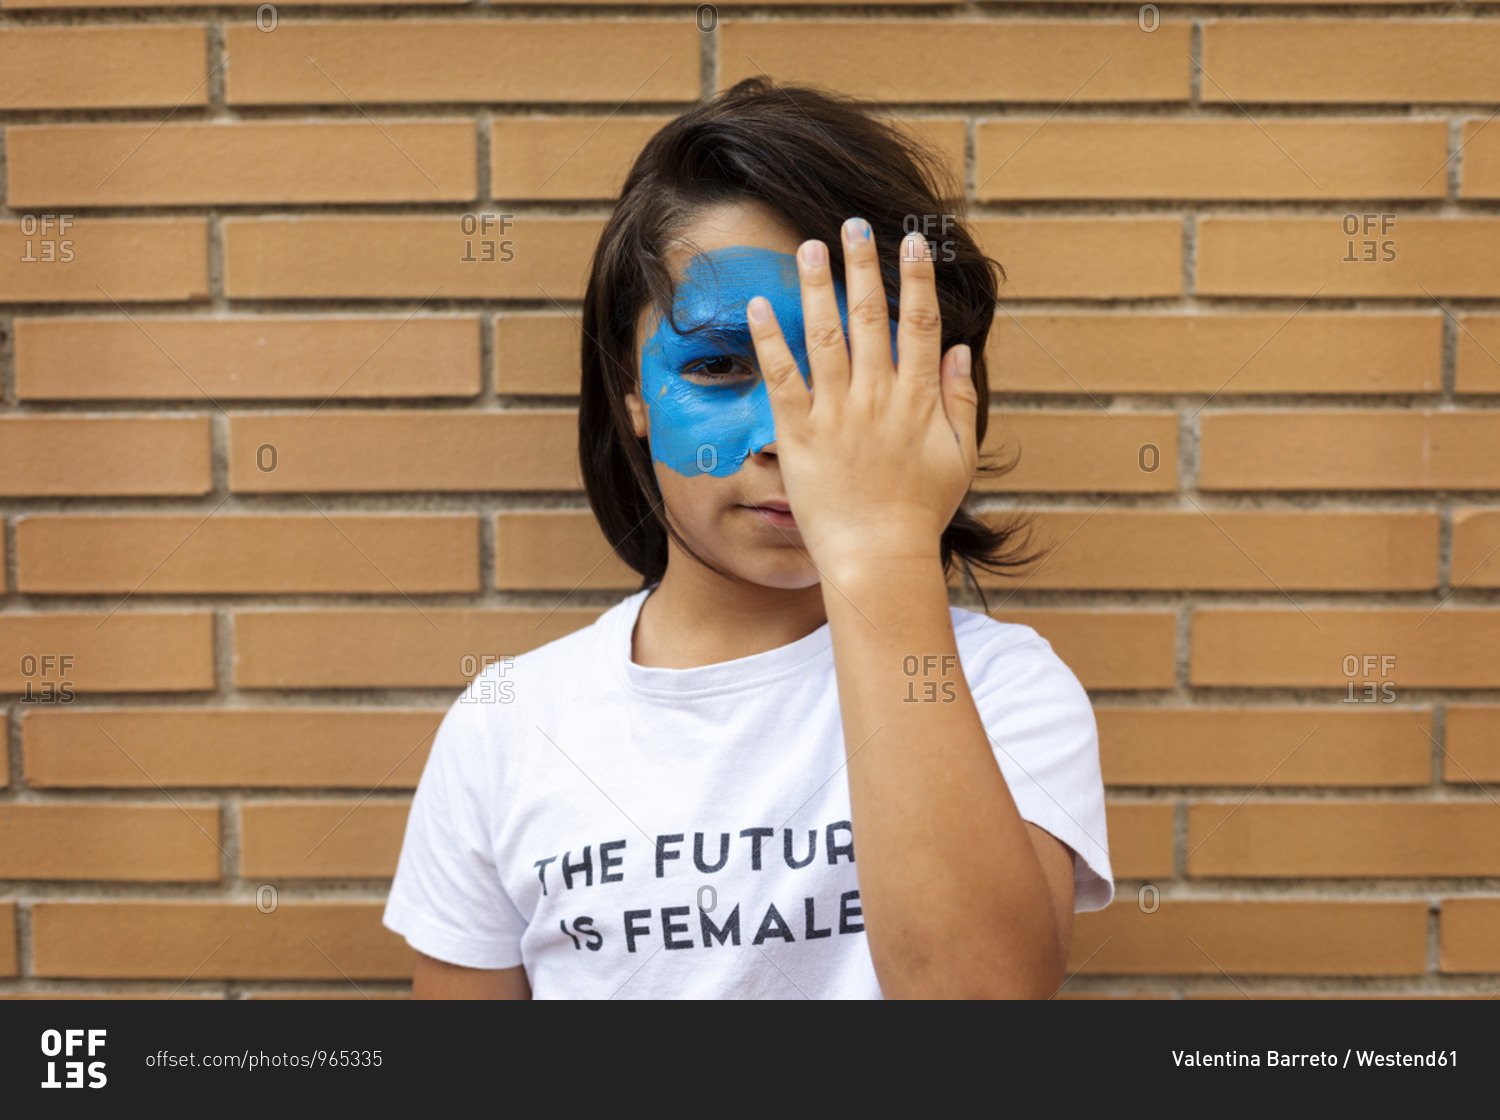 Portrait of boy with painted blue mask on his face wearing t-shirt with imprint \'The Future is Female\'